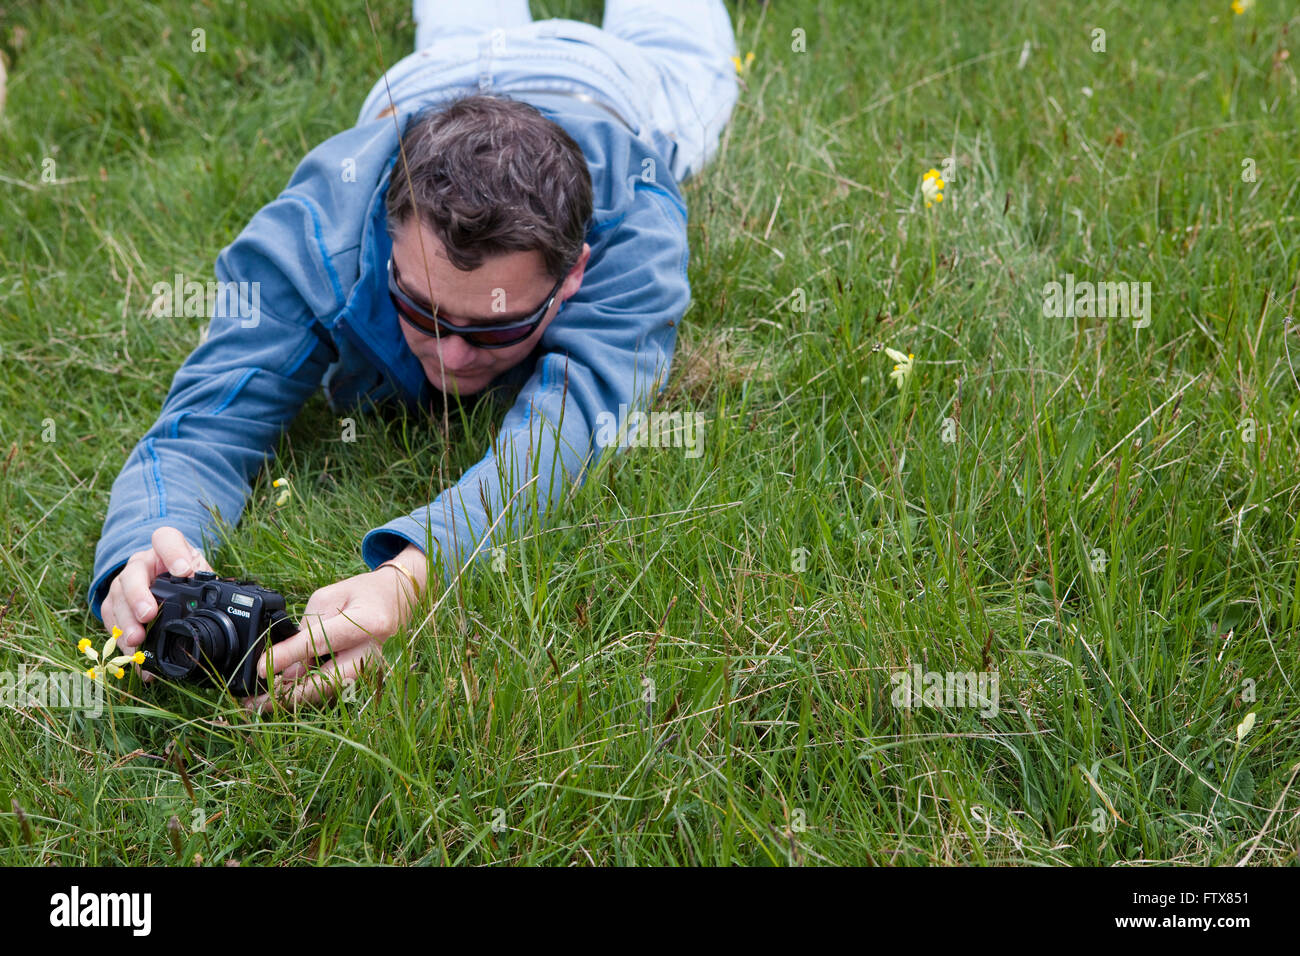 A man lays in the grass so that he can get a low angle to enable him to take a photograph of a small cowslipo, a wild flower he has found on a country walk or ramble. Stock Photo